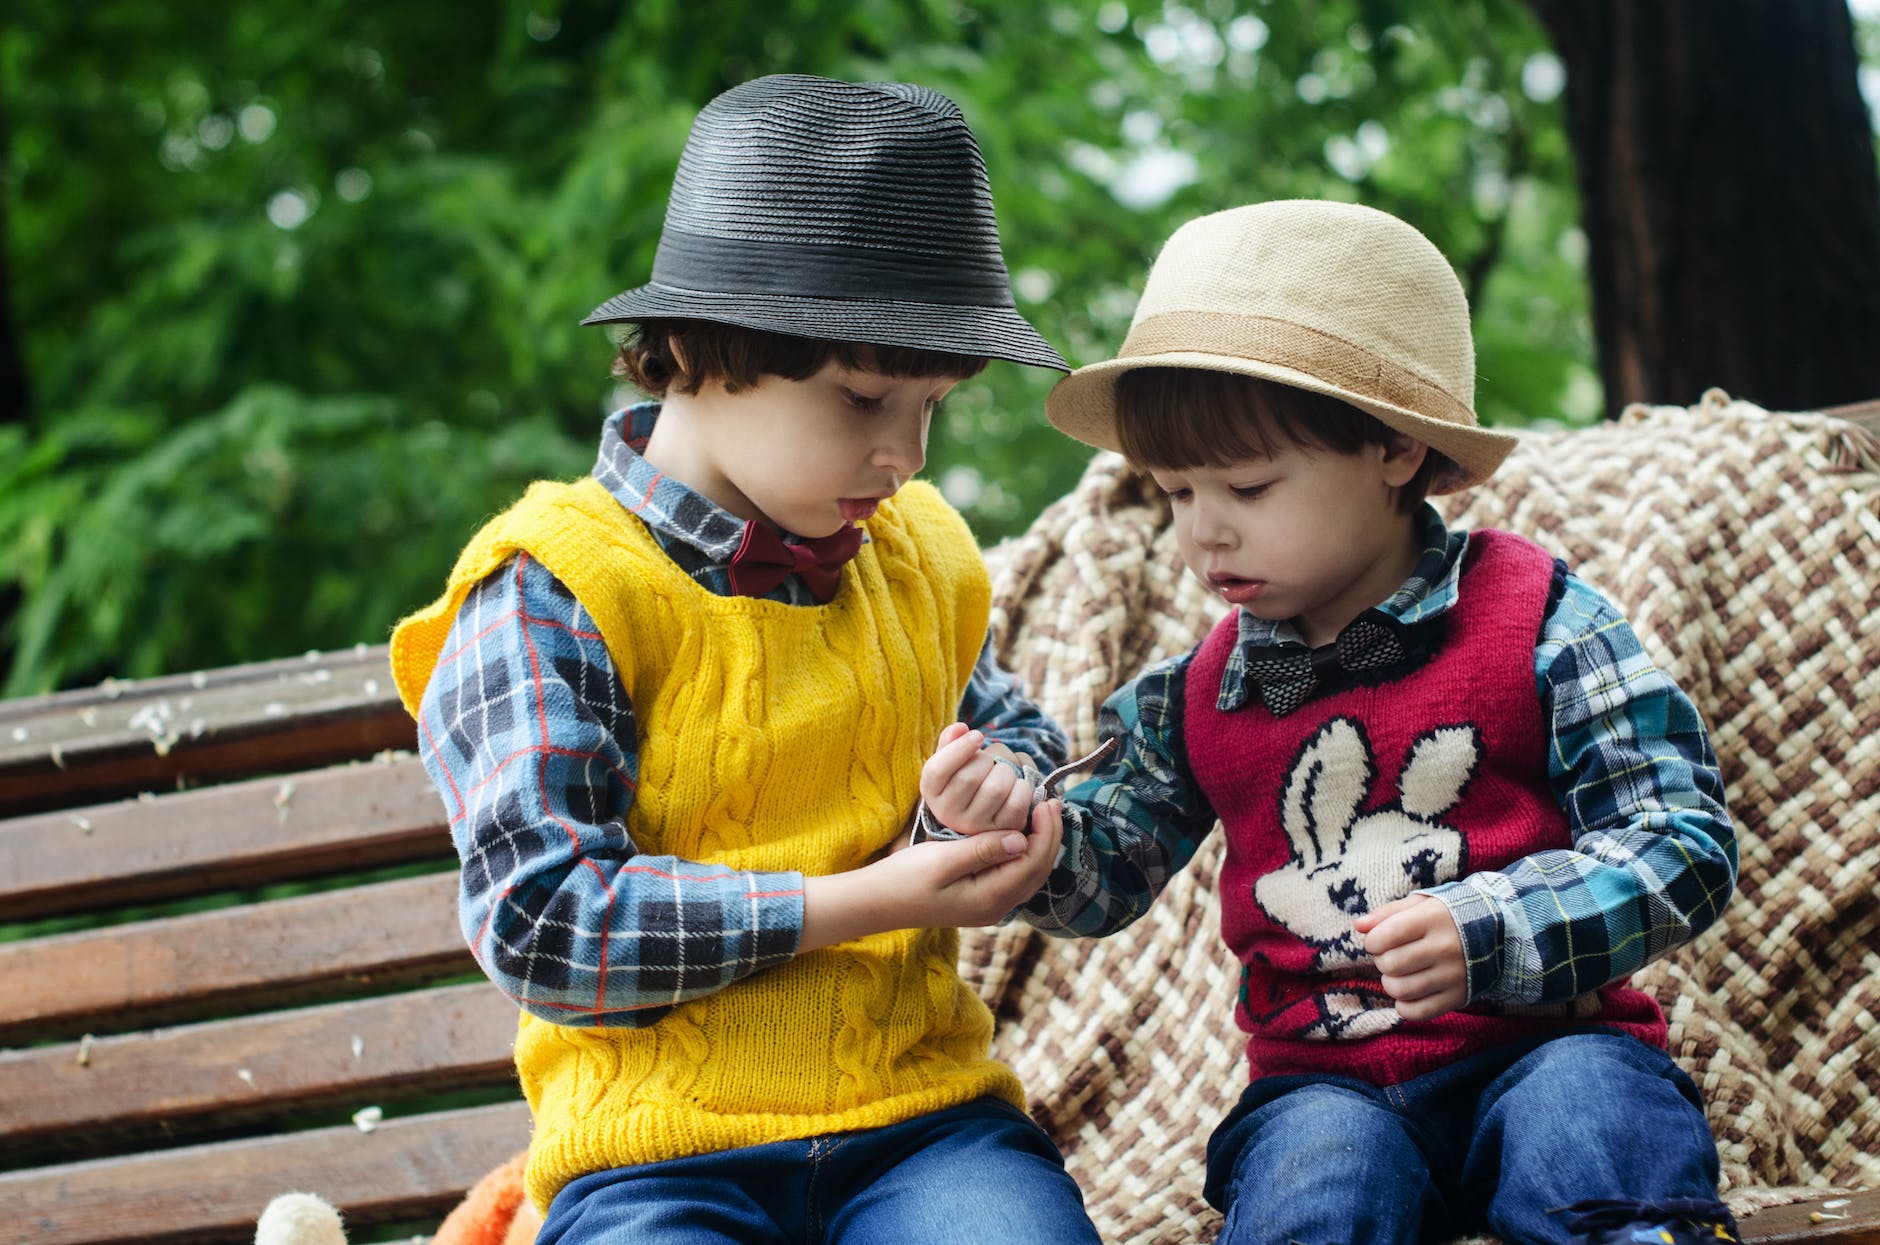 two boys sitting on bench wearing hats and long sleeved shirts